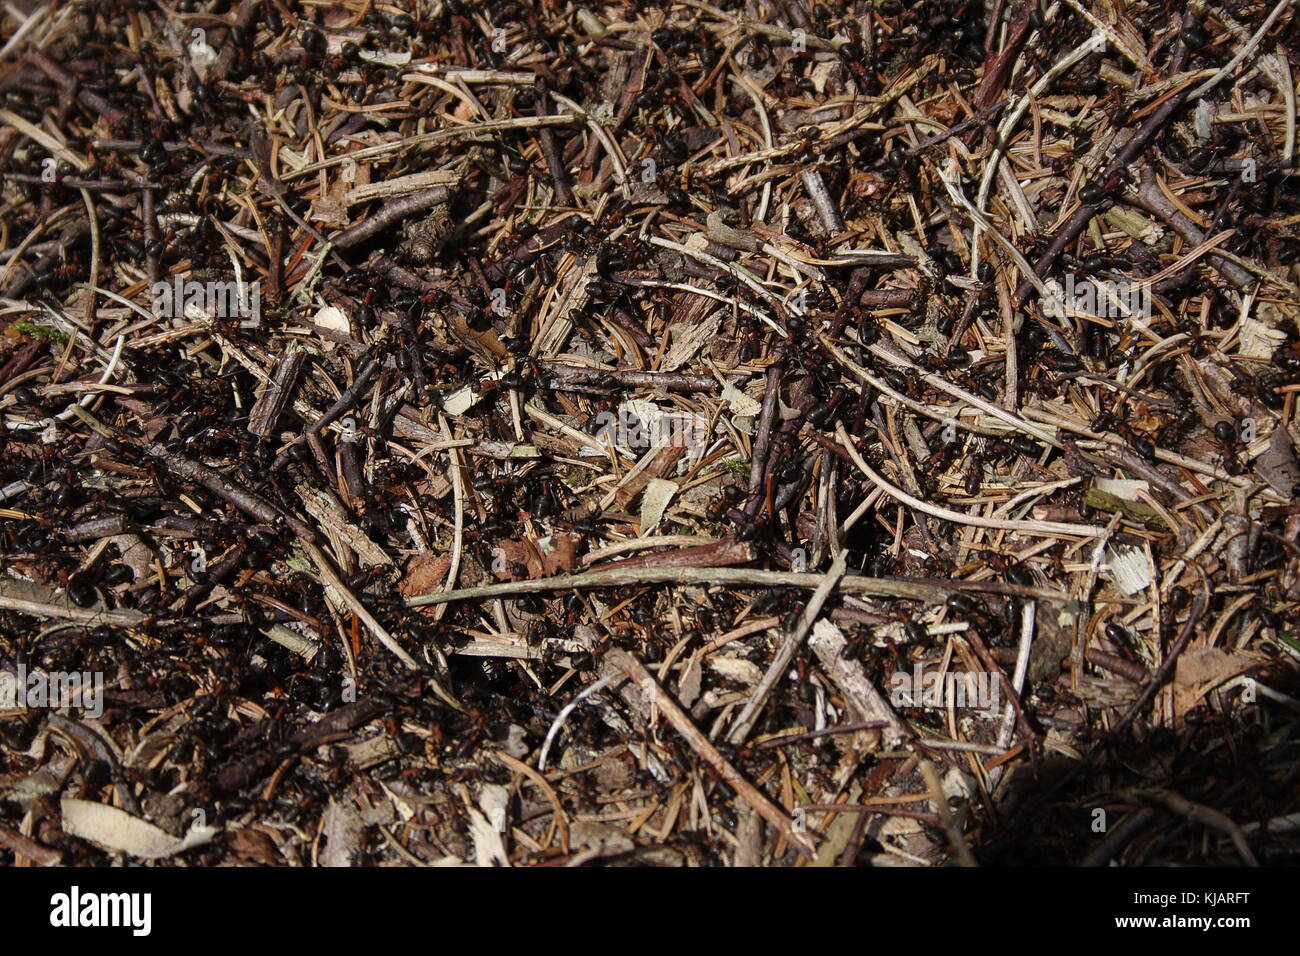 Wood Ant nest surface, with ants running around among the wood twigs, make an ideal screen background for either paper or computers. Stock Photo